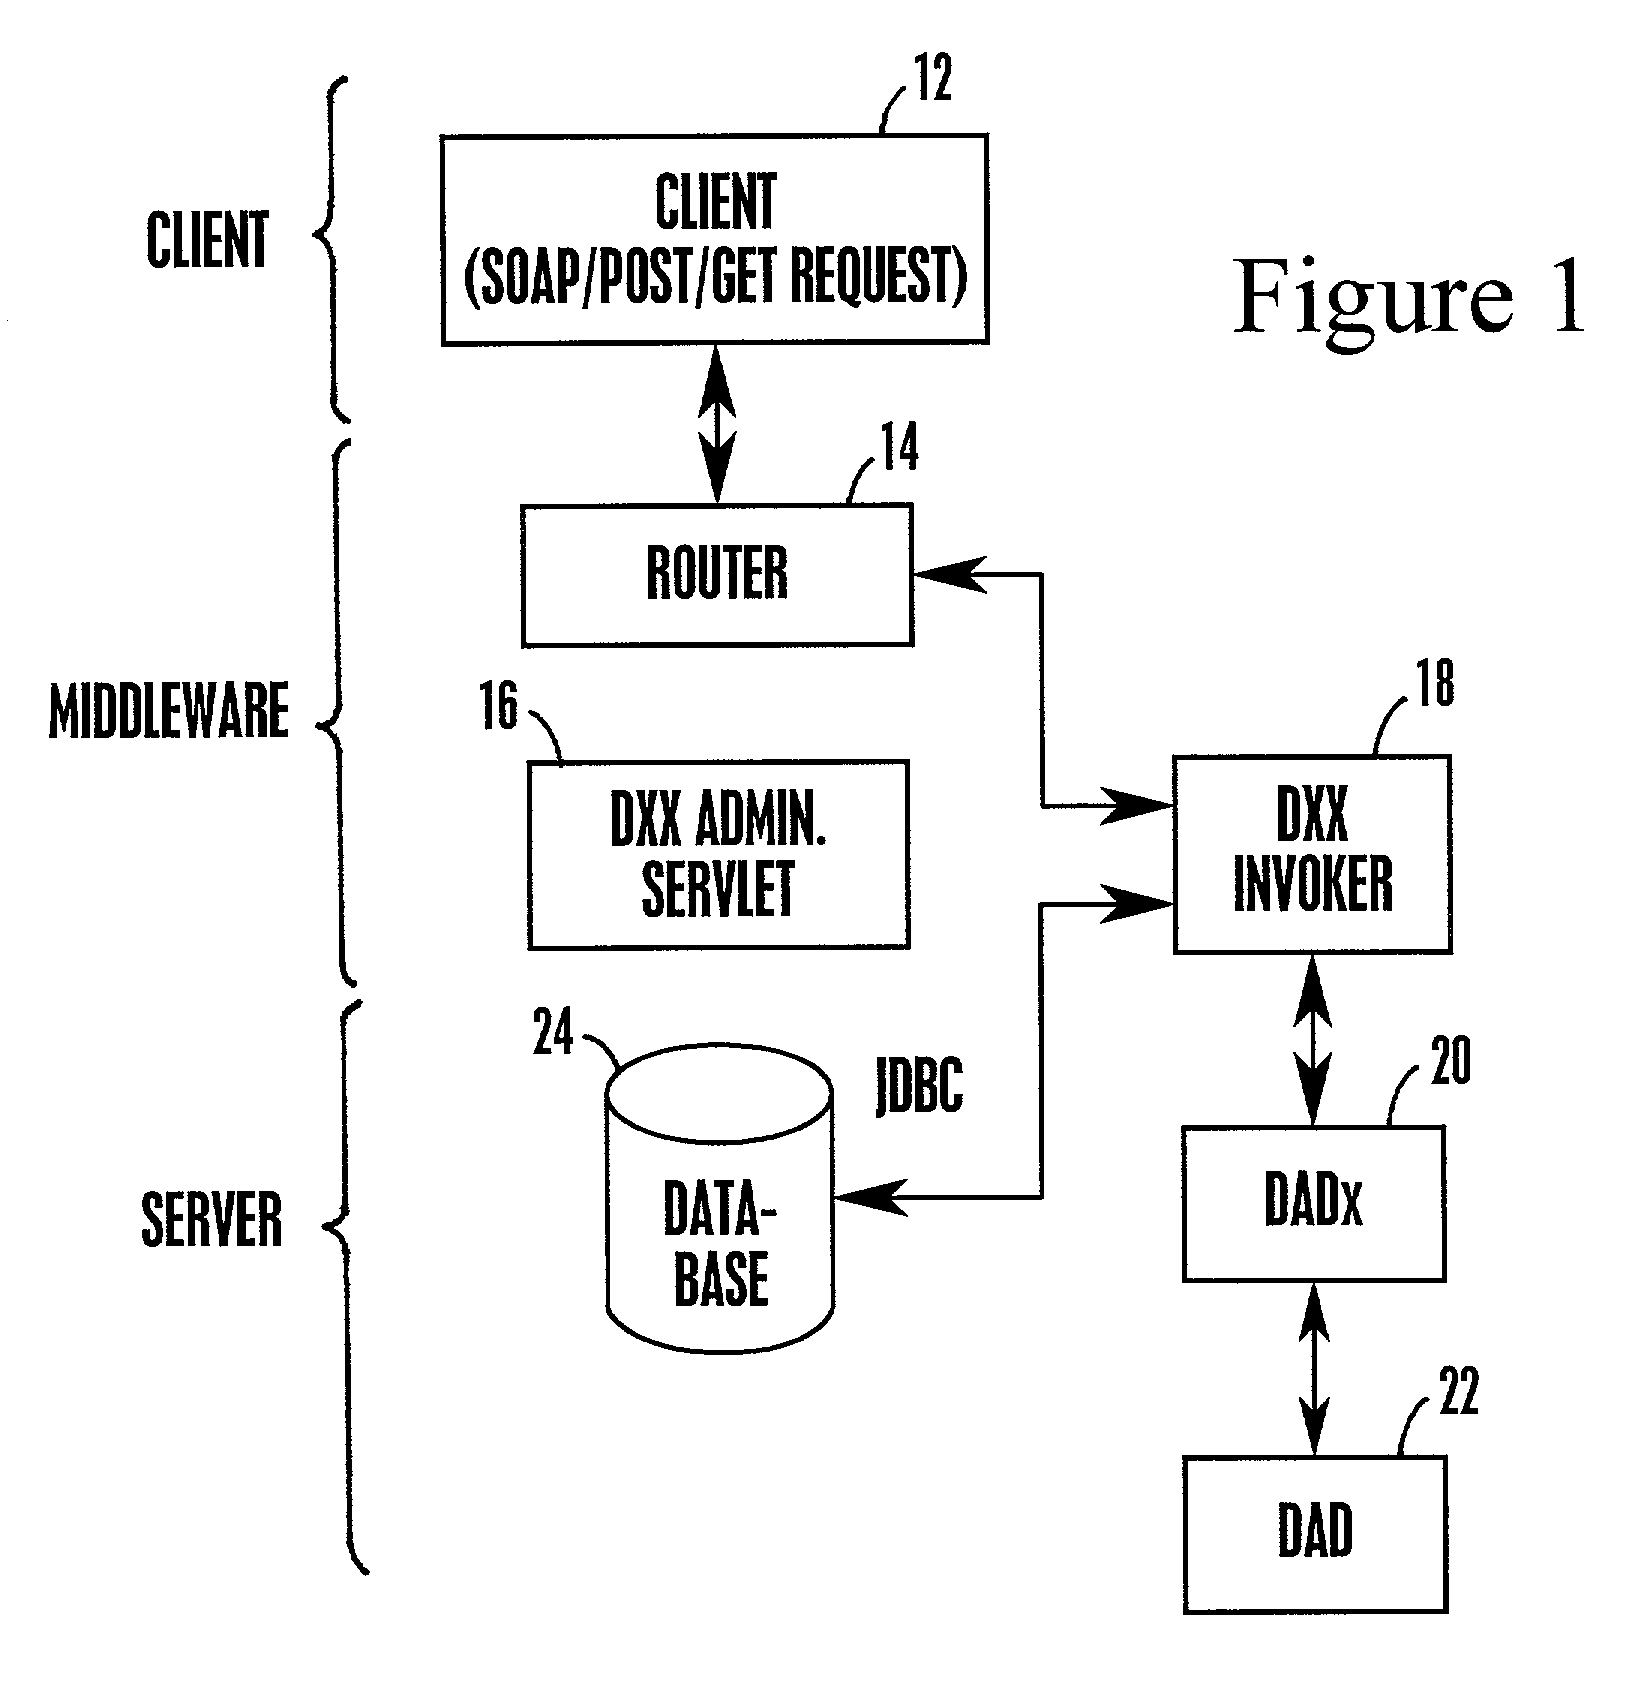 System, method, and computer program product for reformatting non-XML data for use with internet based systems